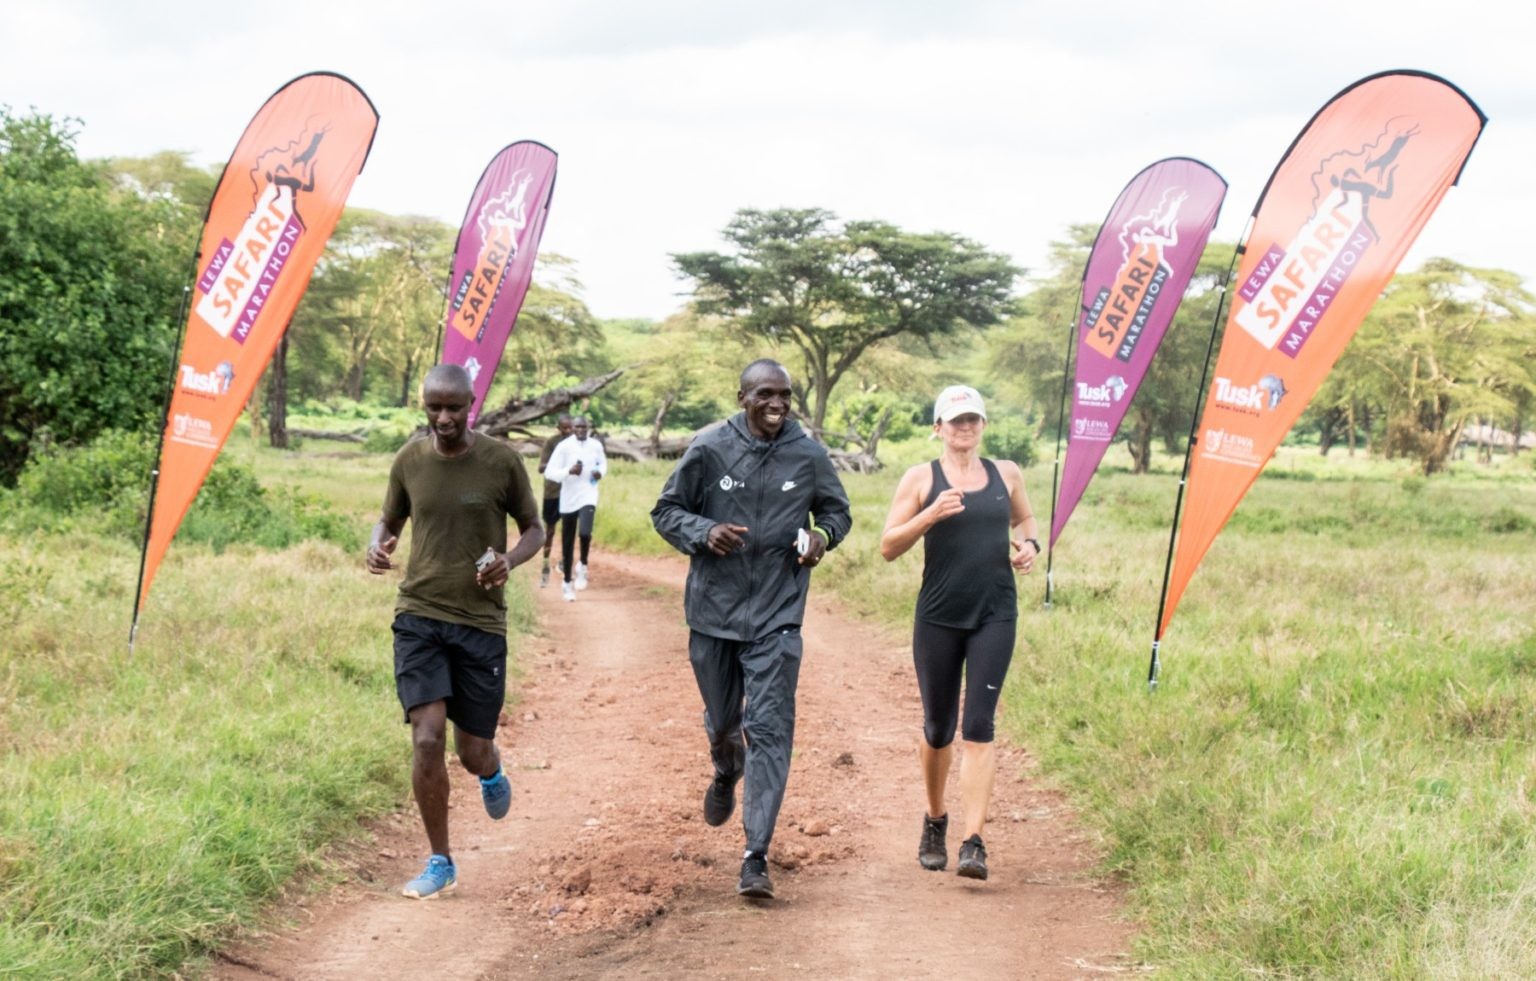 Having been cancelled due to the pandemic, this yearâ€™s Lewa Safari Marathon will be staged virtually, with Eliud Kipchoge leading the way 